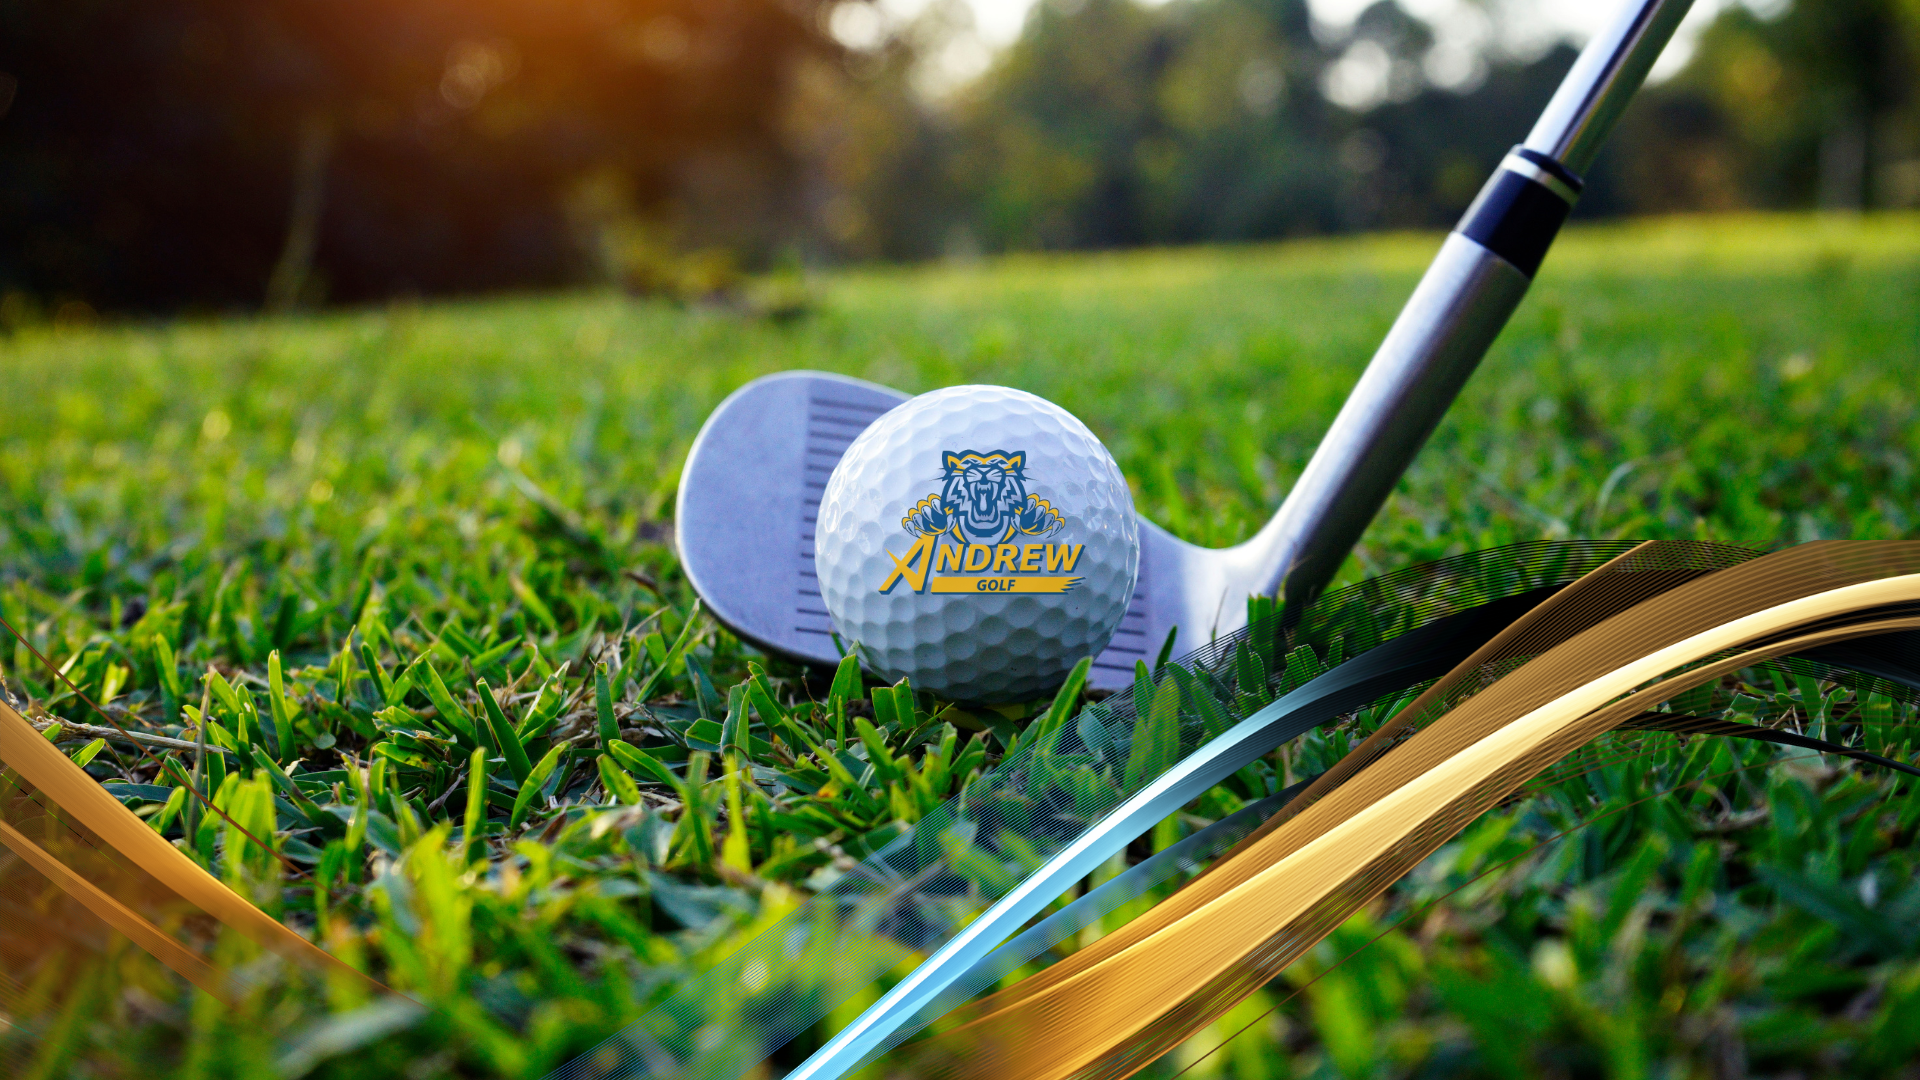 Andrew Men's Golf Set For 22nd Annual MGCCC Fall Invitational